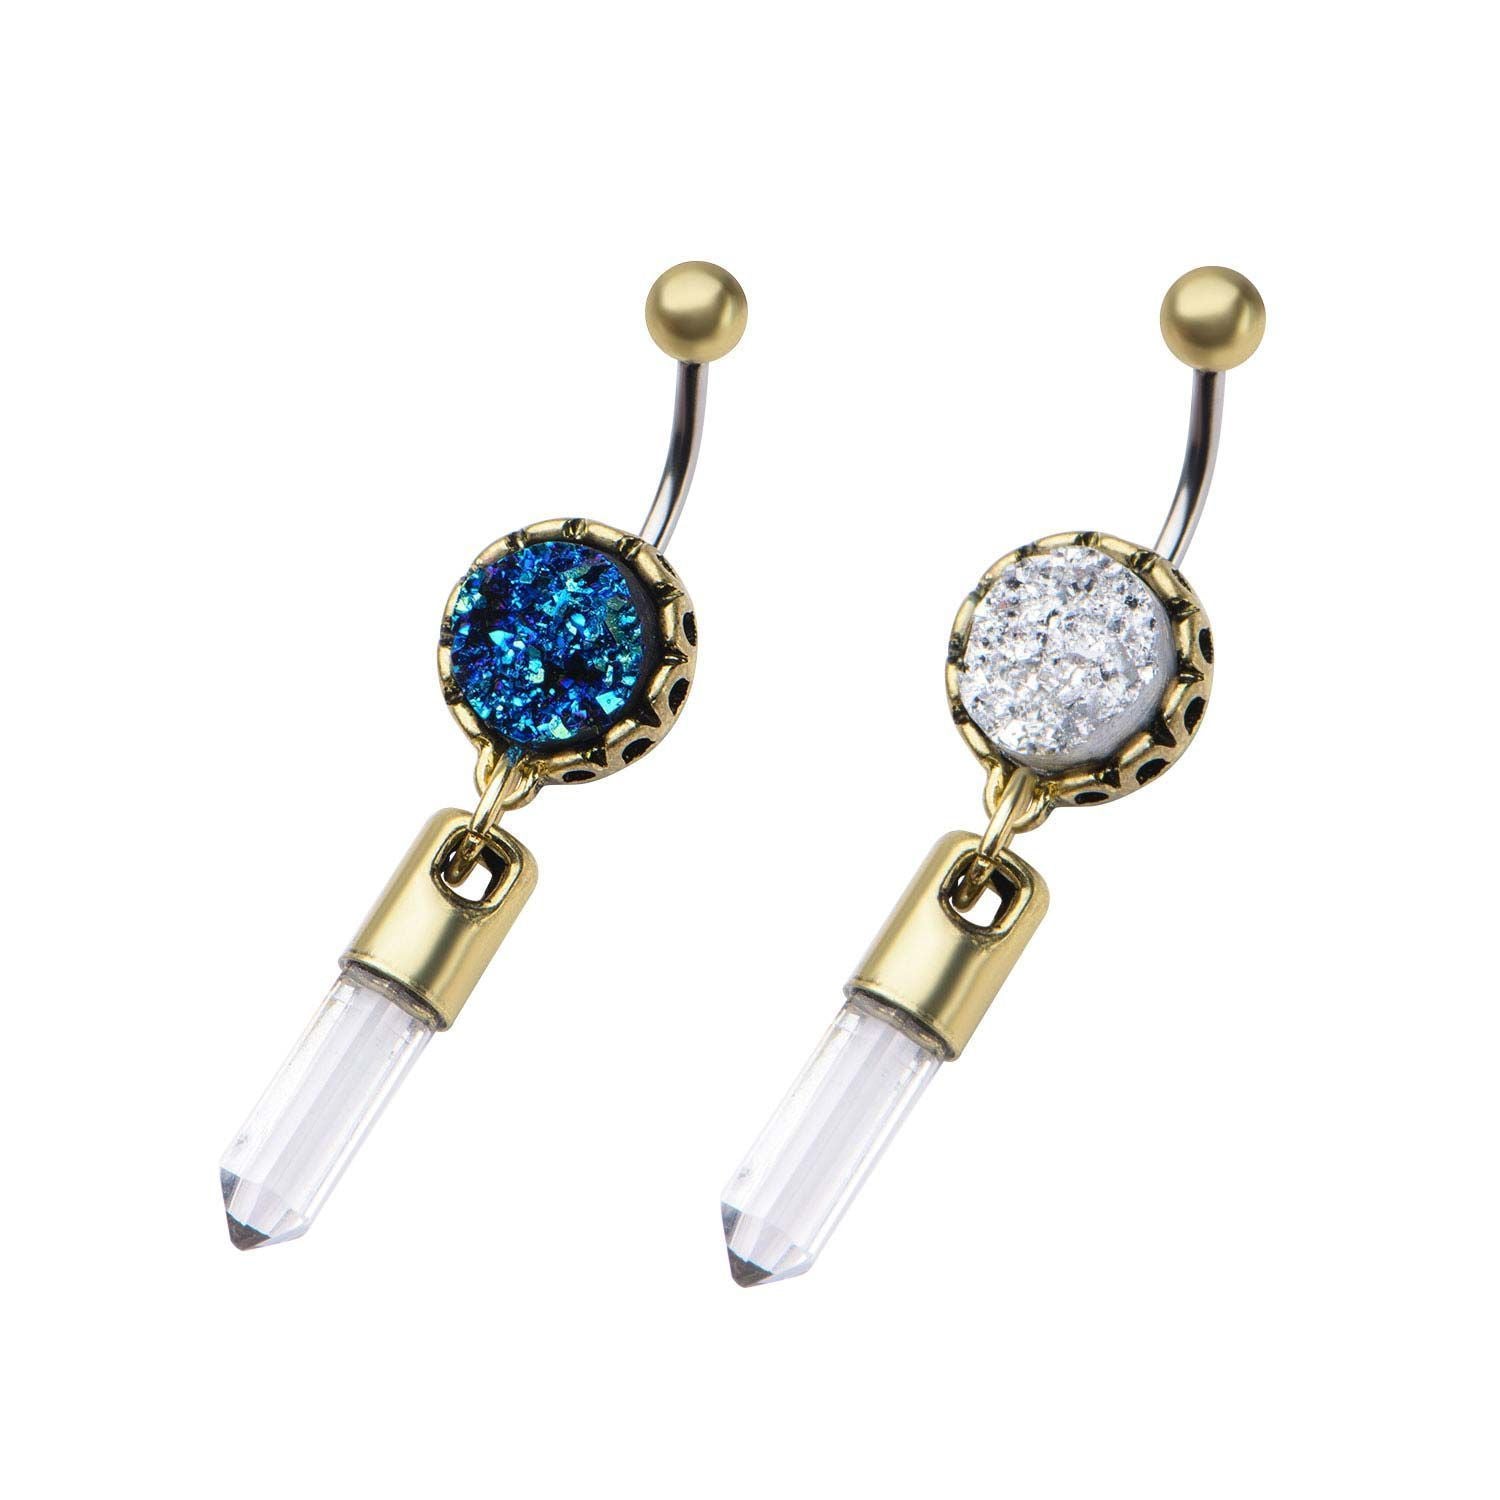 14g Gold Plated Navel Rings w/ Druzy and Crystal Pendulum Dangle Charm. sbvnsdrz1